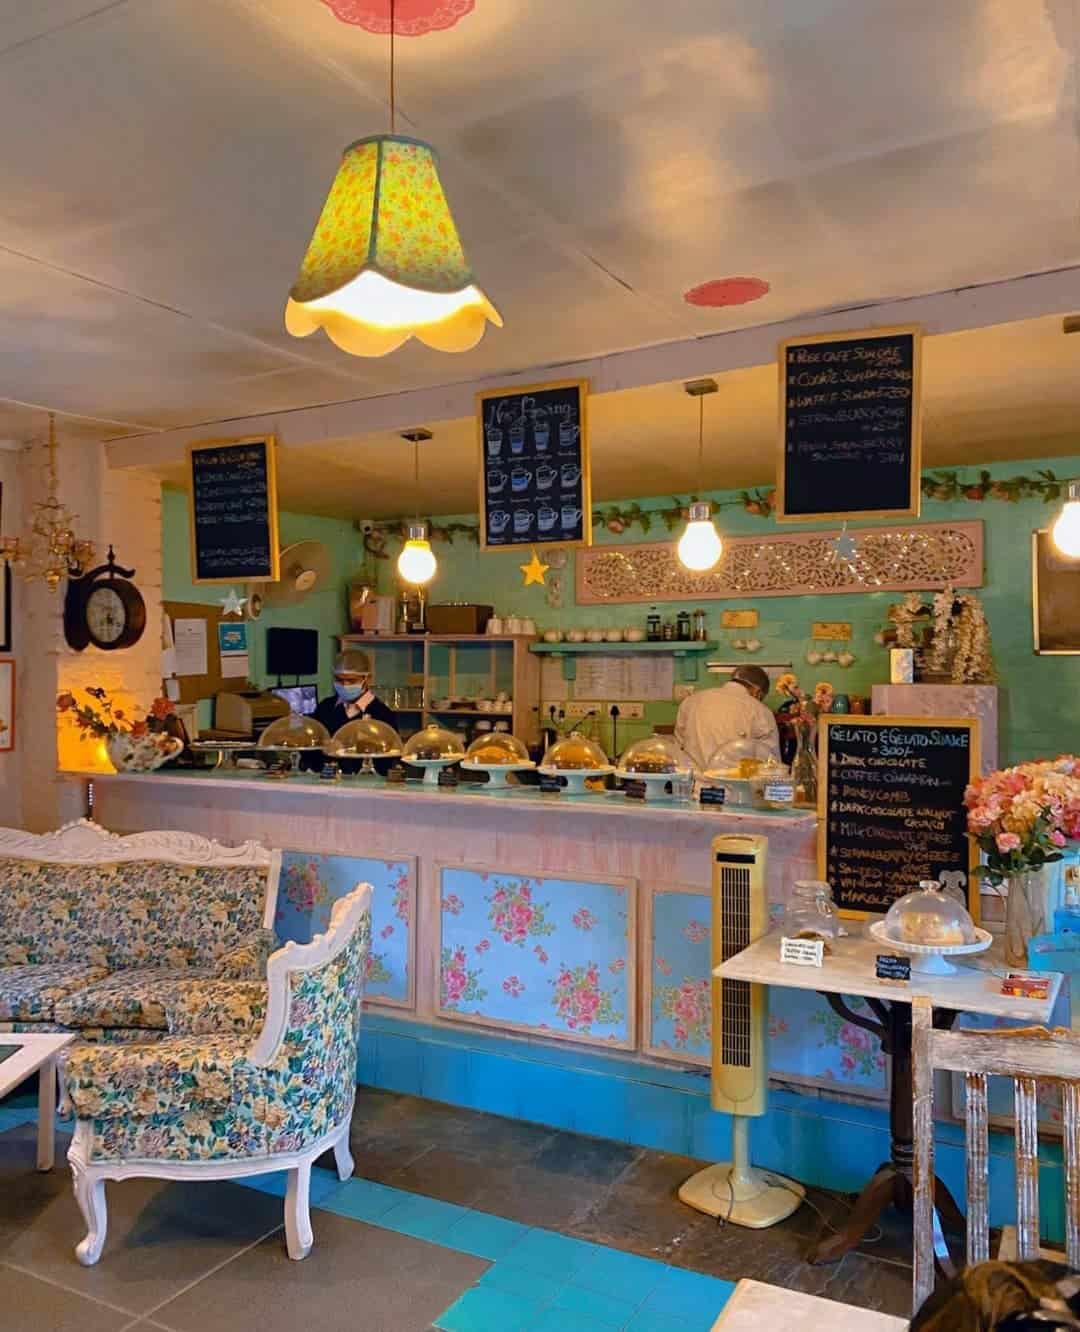 Top 10 Instagrammable Cafes In Delhi, India - Just In Travel